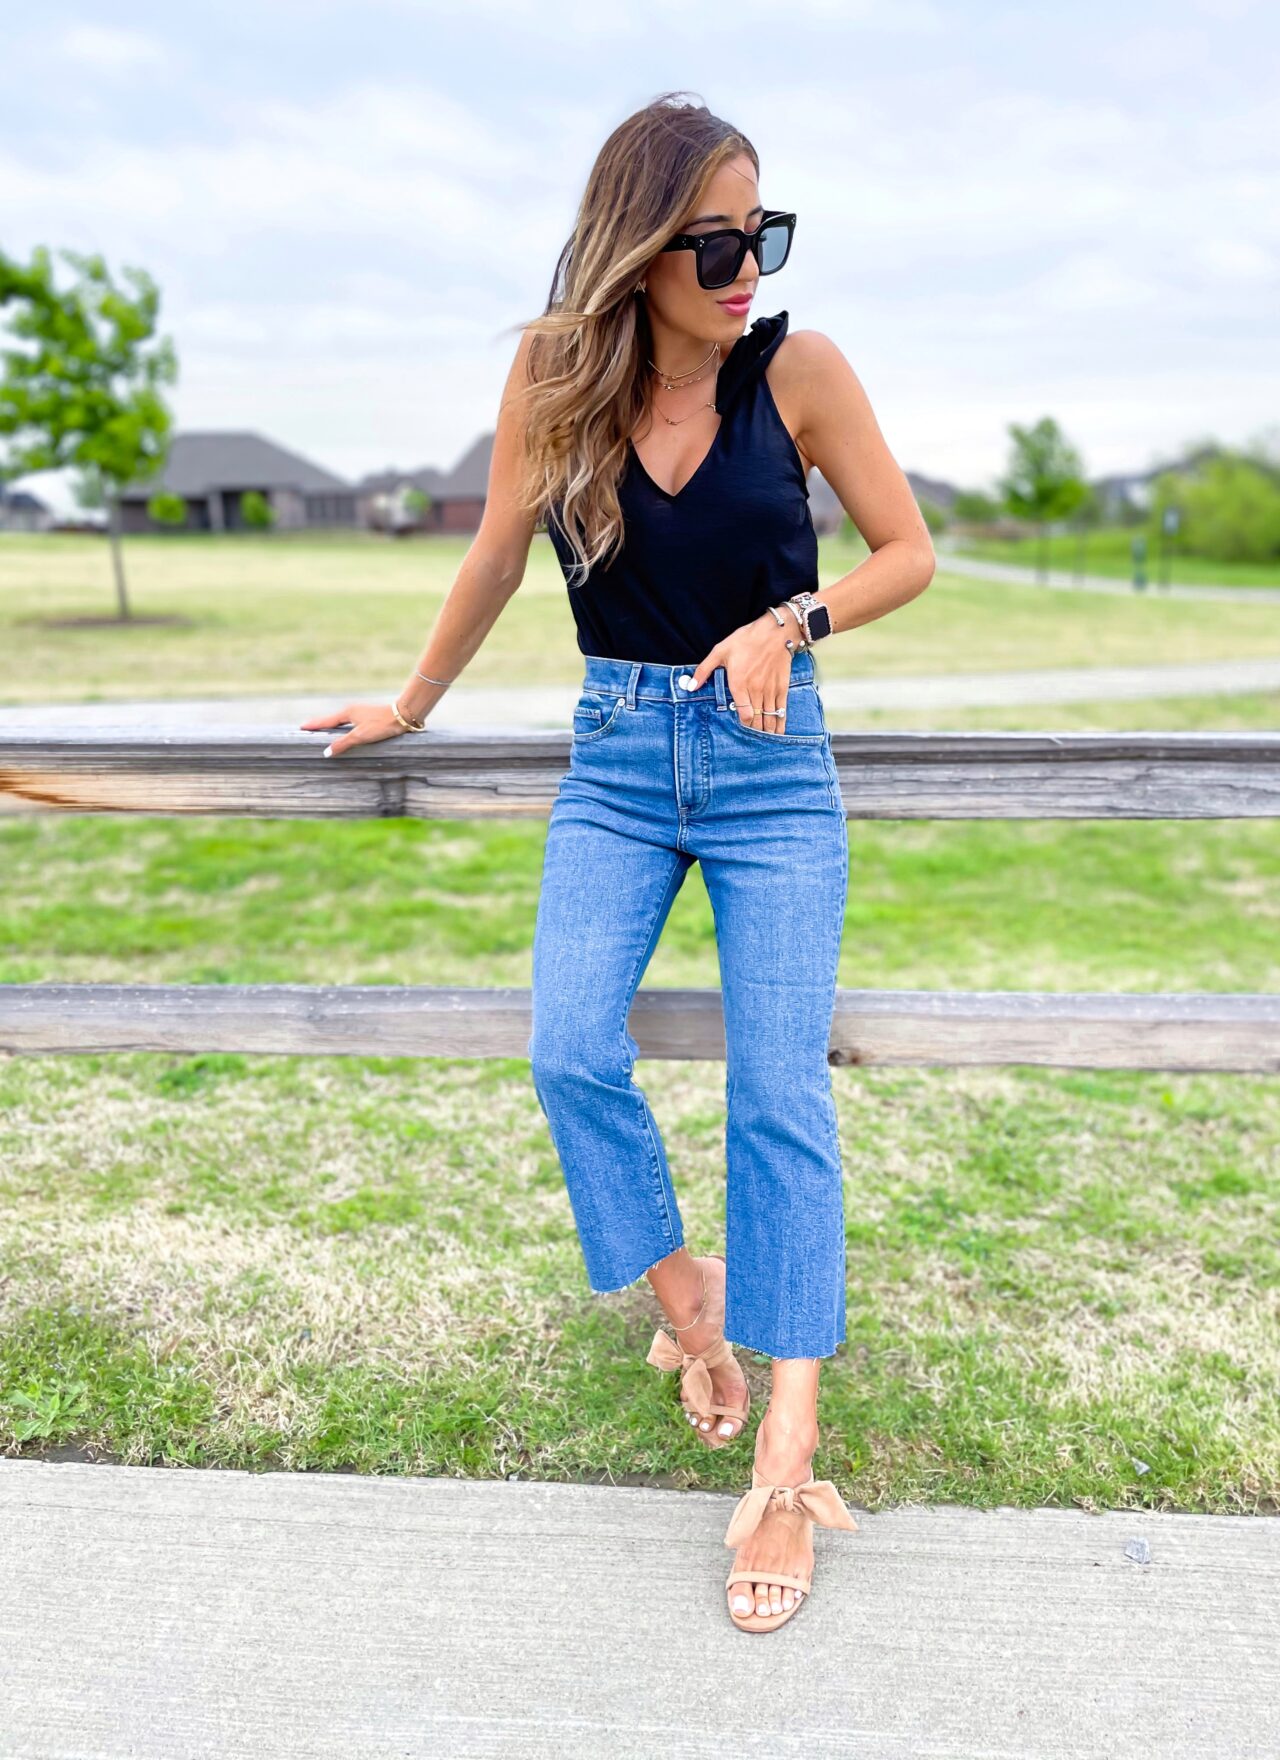 lifestyle and fashion bloggers alexis and samantha belbel share their favorite cropped flare jeans for petites from express and how to style them - with a bodysuit and black tank | adoubledose.com